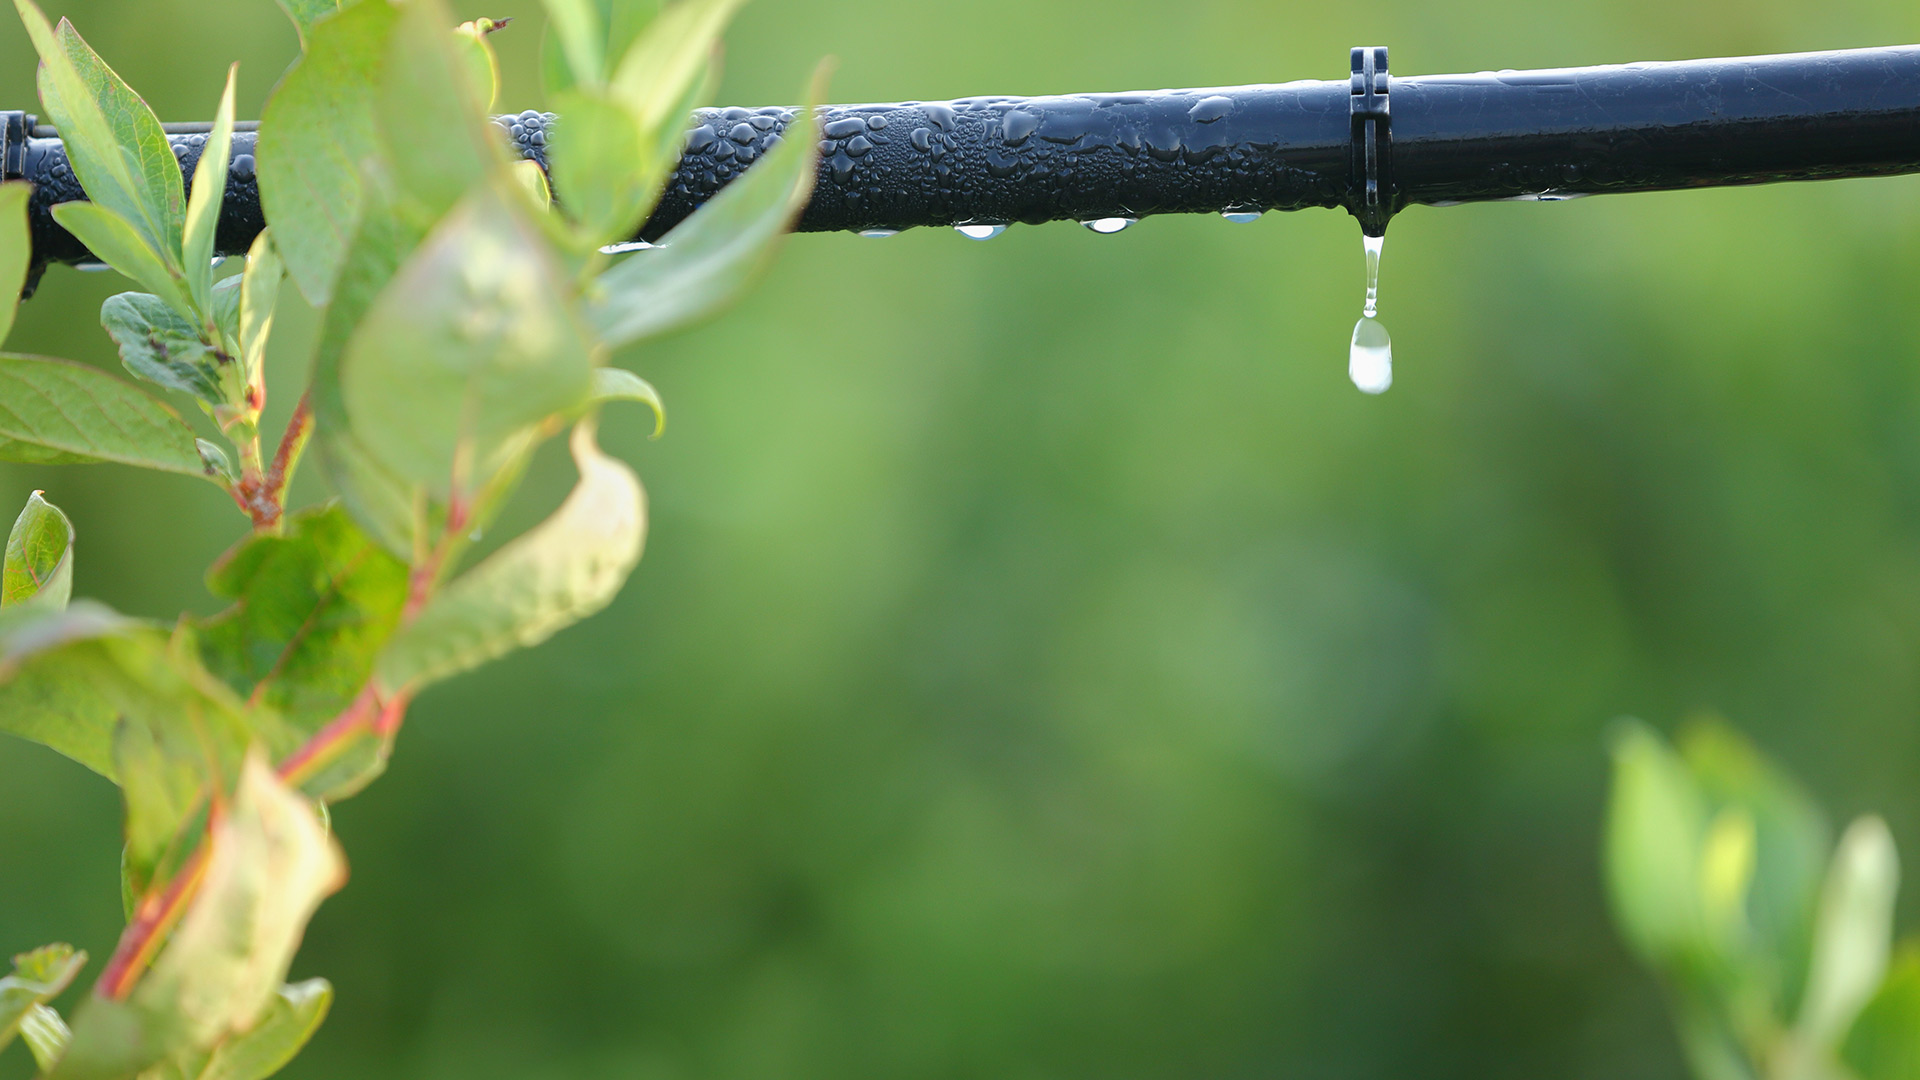 Is a Drip Irrigation System Worth it? YES!